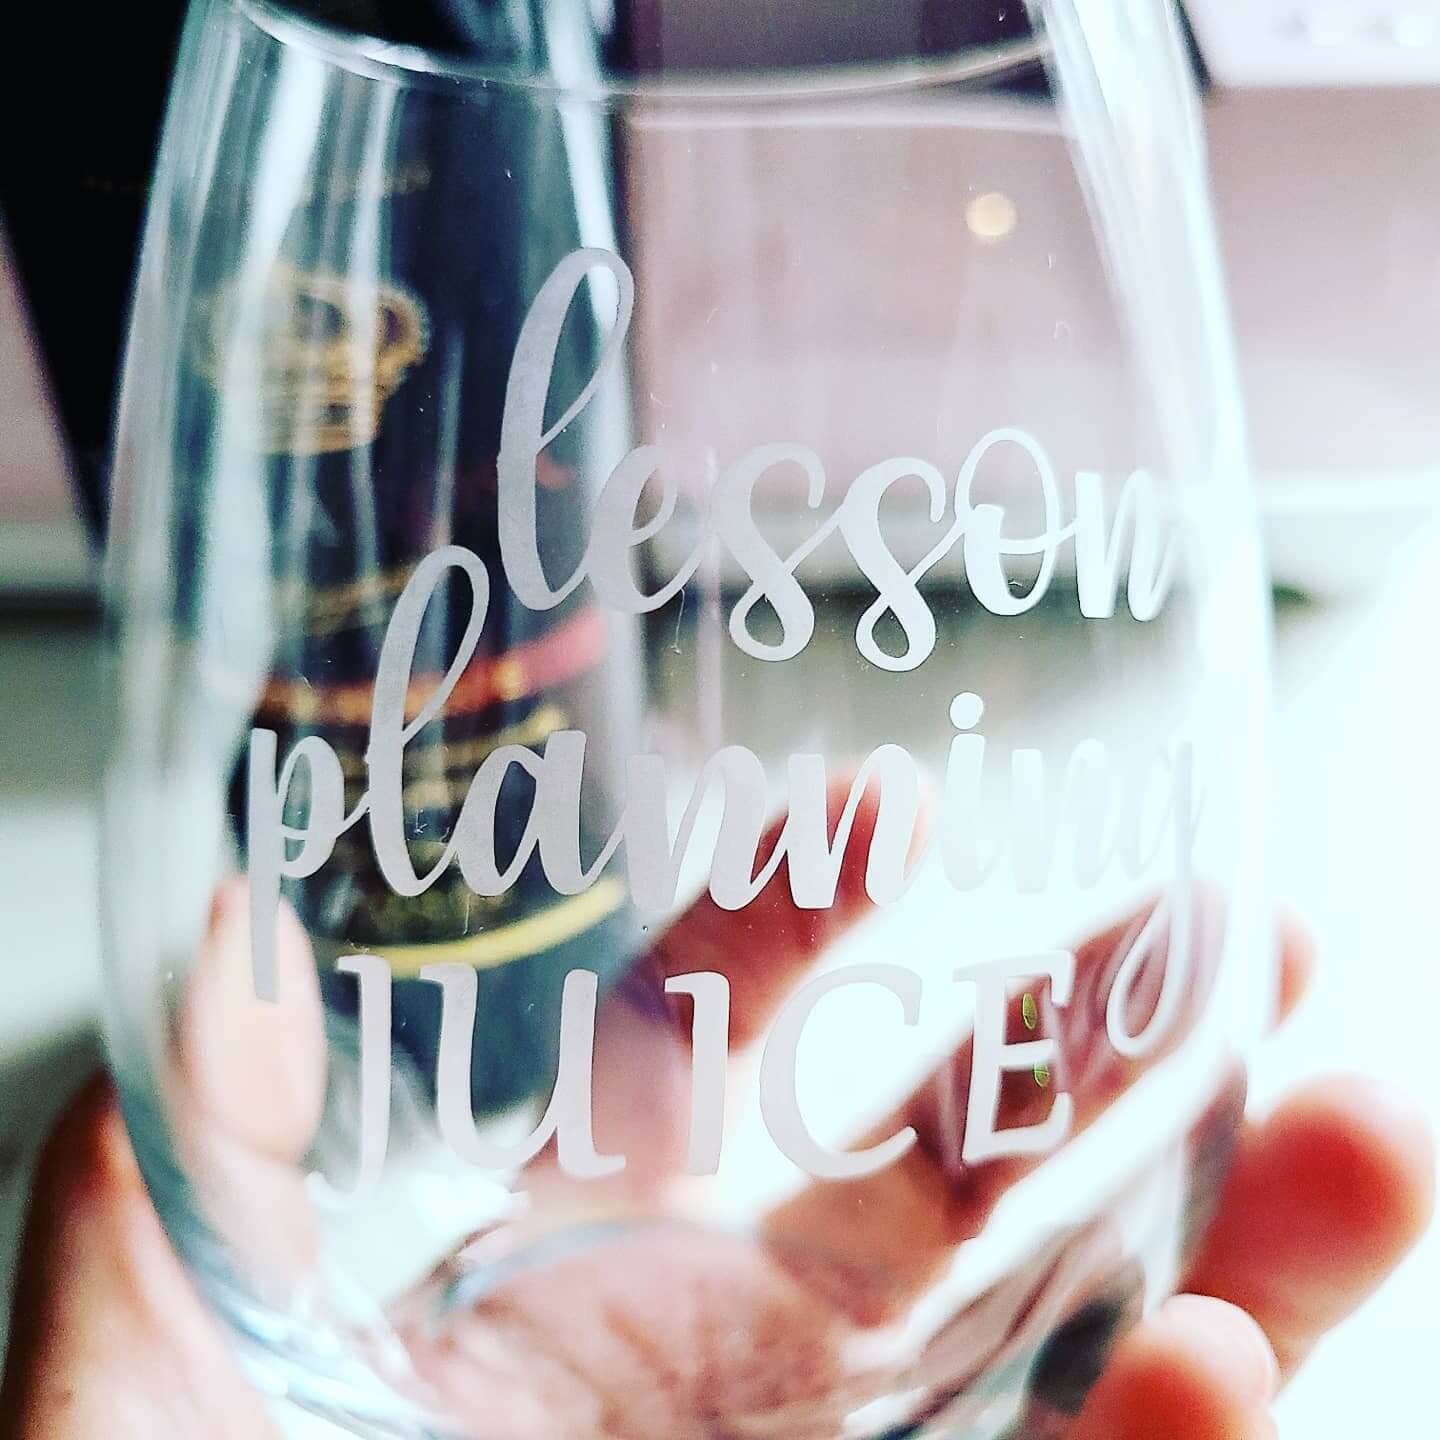 Create custom etched glasses for easy, inexpensive gifts - Cricut